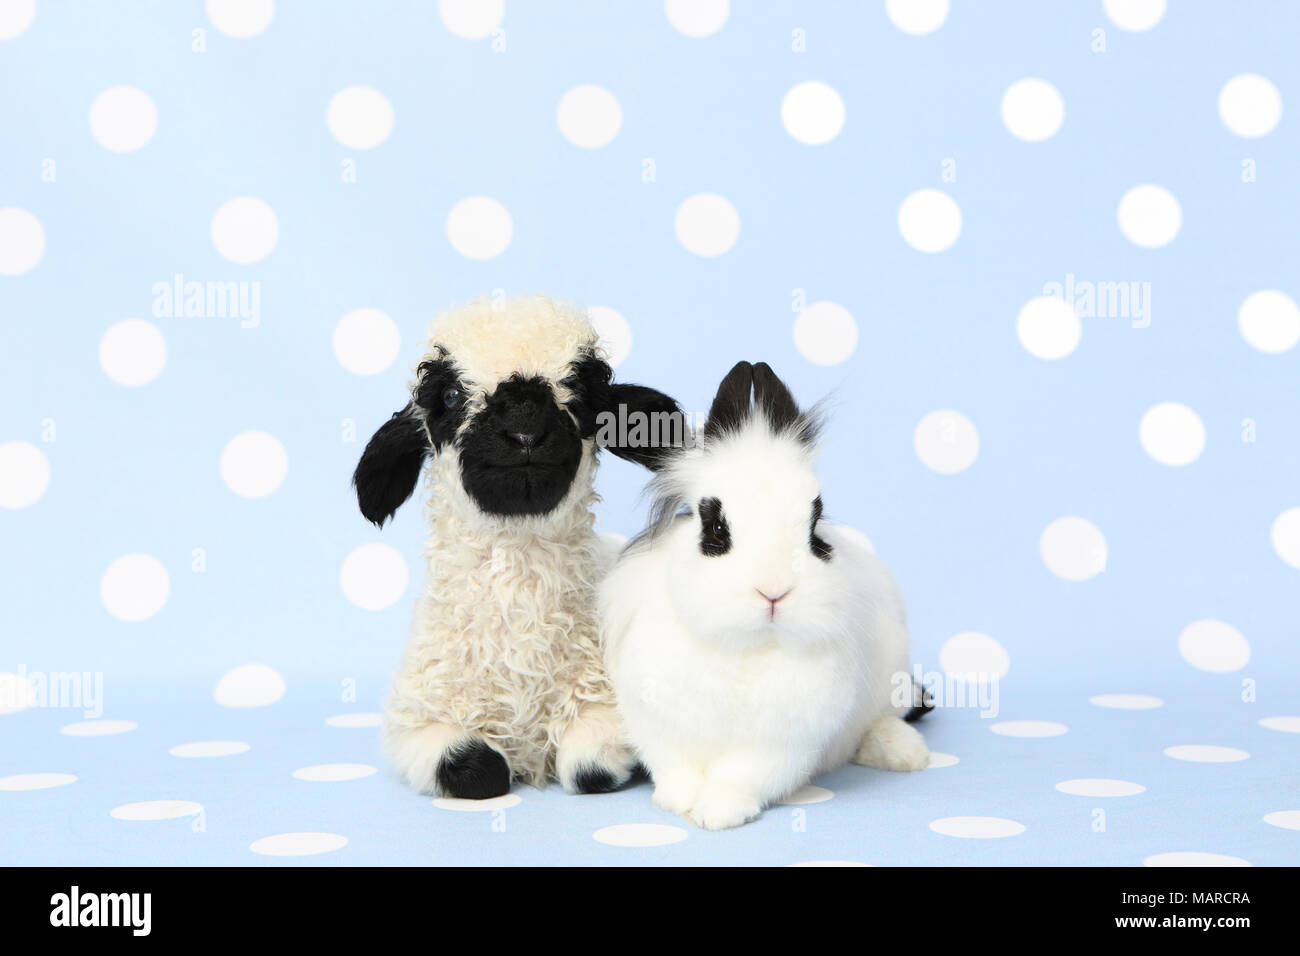 Valais Blacknose Sheep. Lamb (10 days old) and Dwarf Teddy Rabbit next to each other. Studio picture against a light-blue background with polka dots. Germany Stock Photo